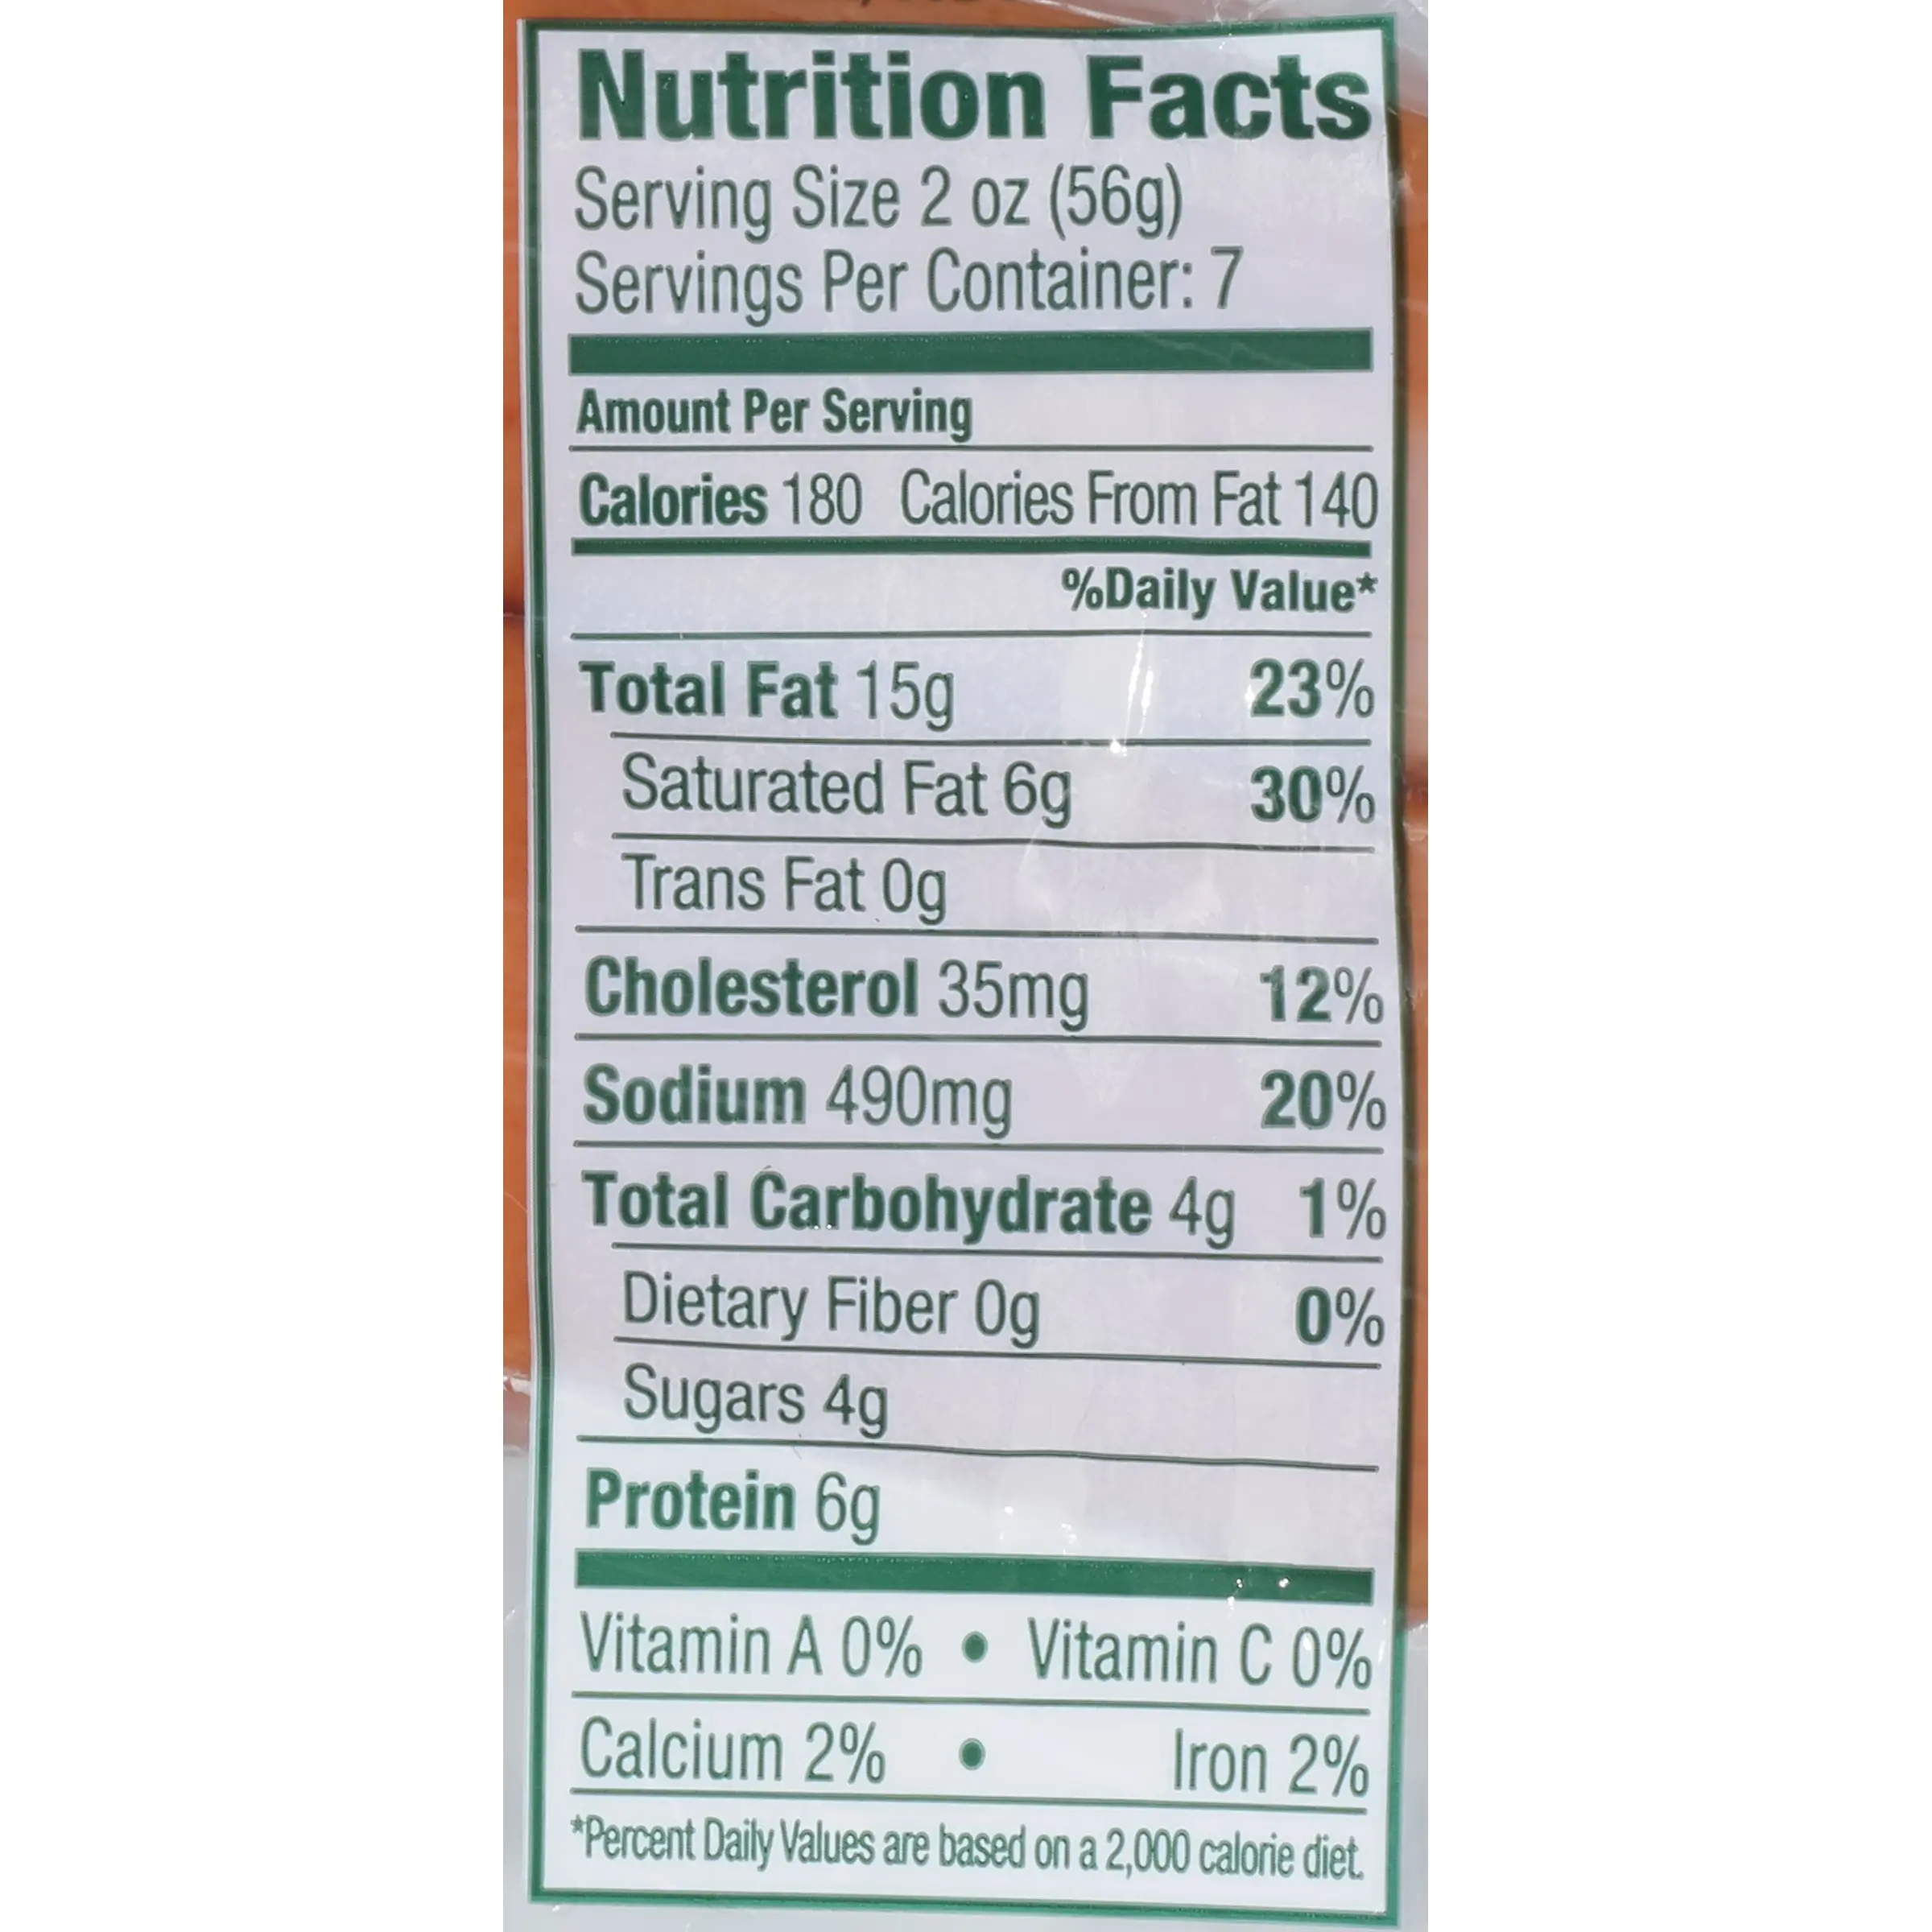 smoked sausage nutrition value - What vitamins are in smoked sausage